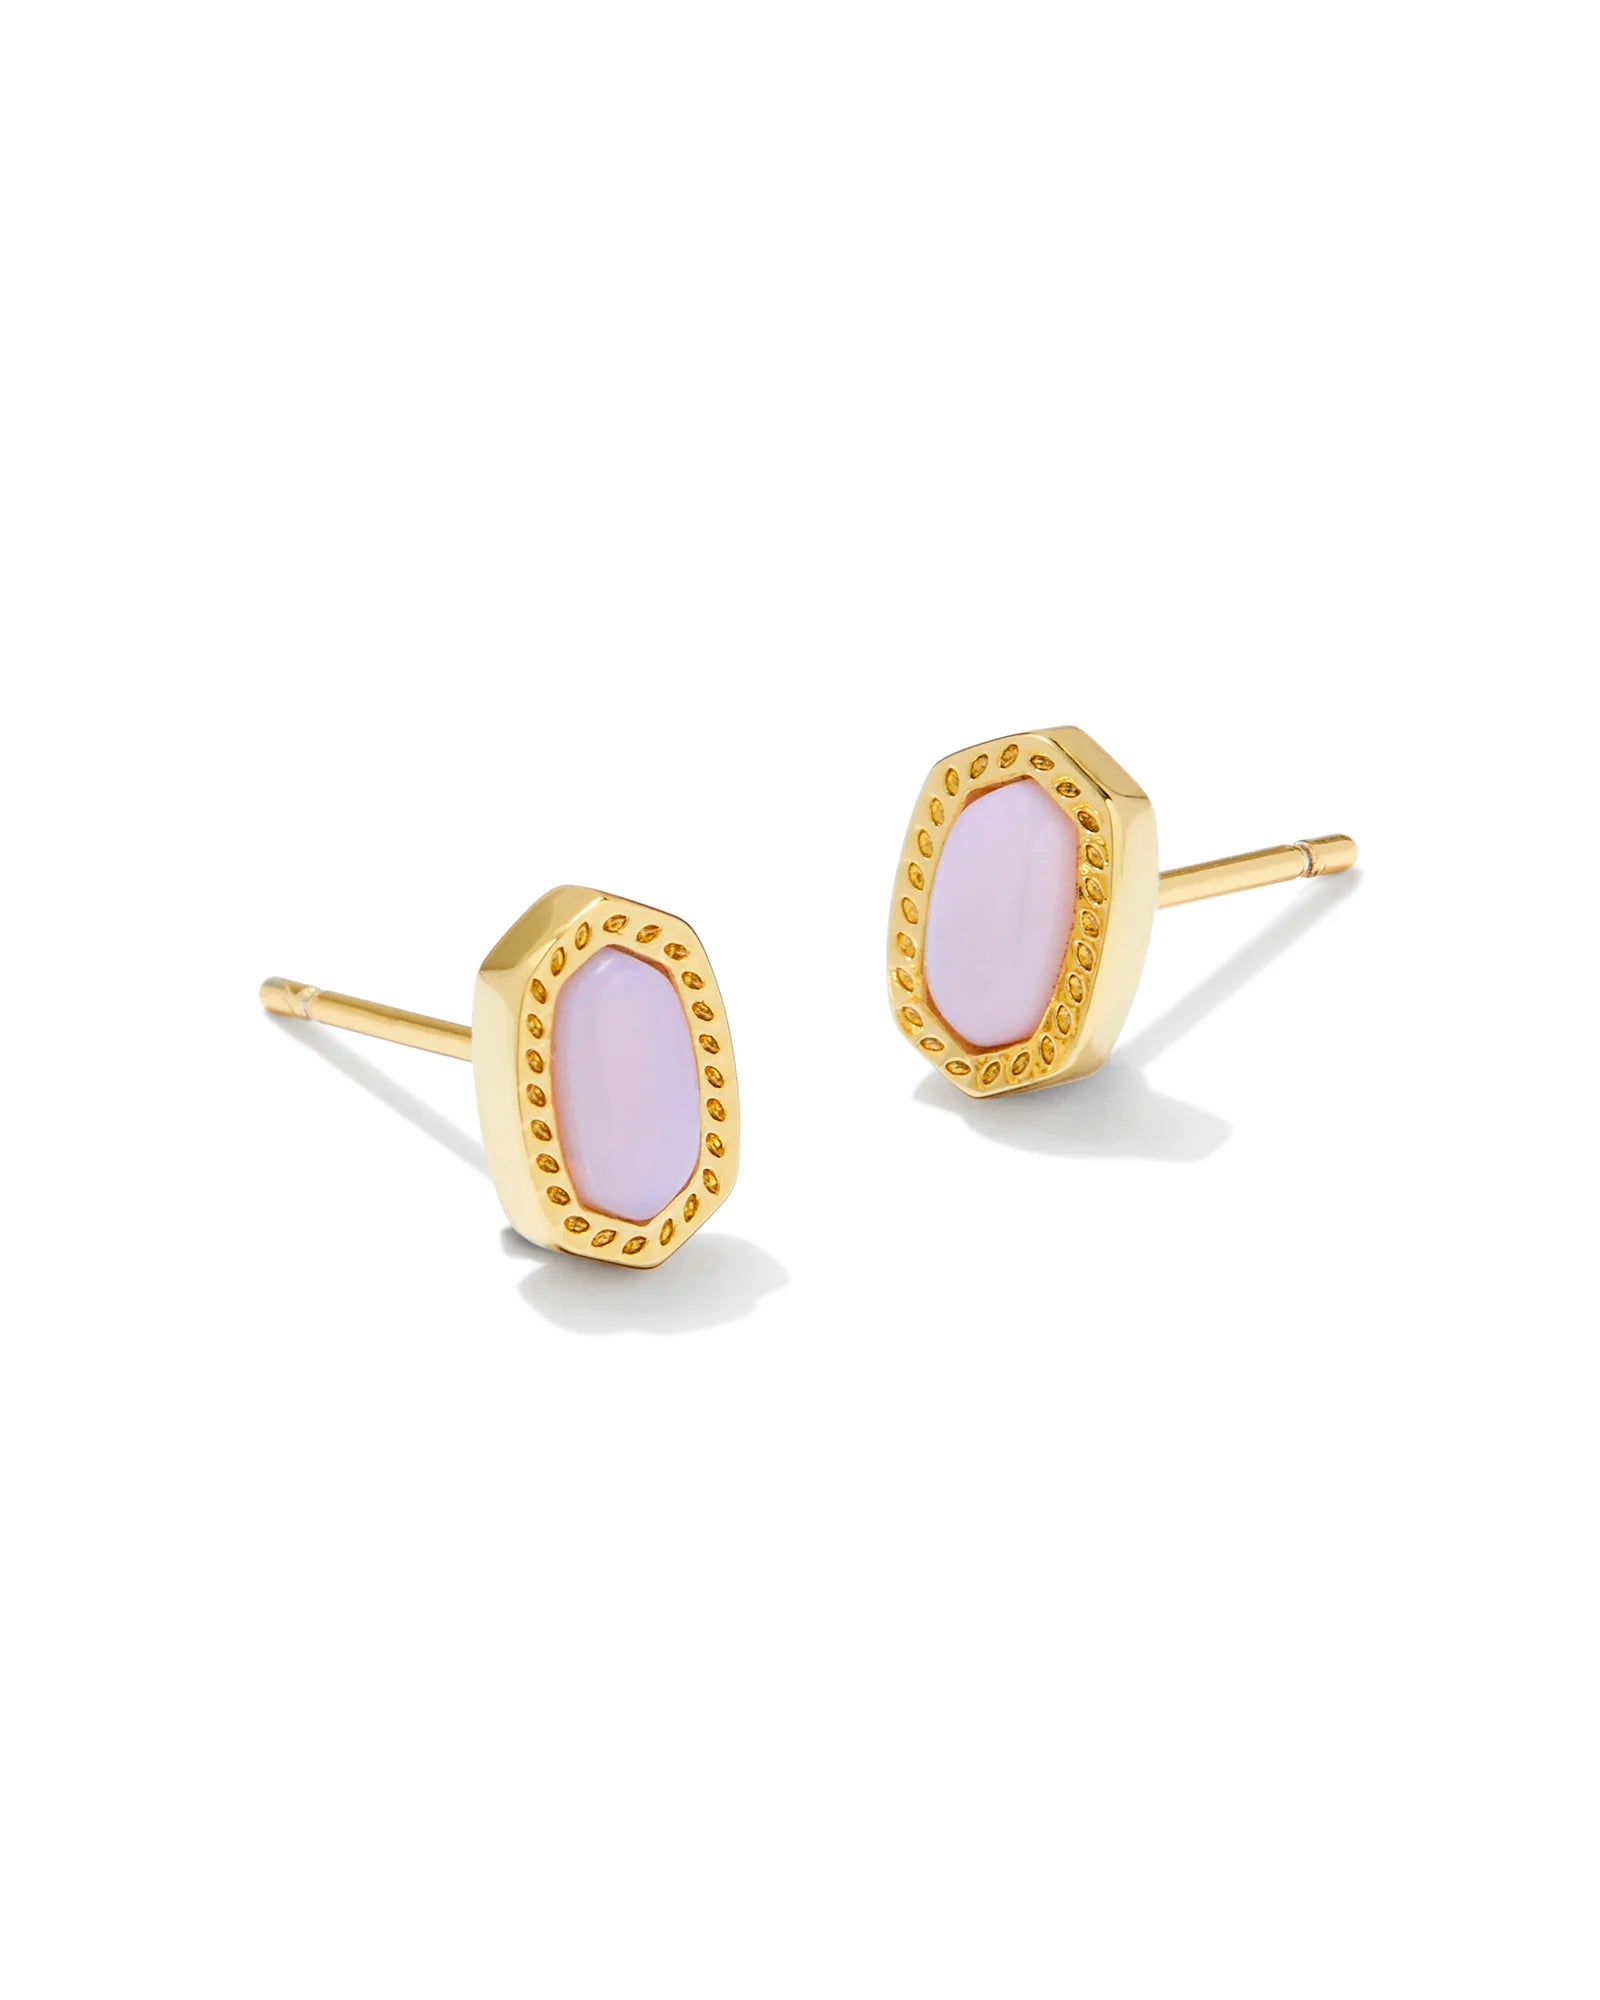 Kendra Scott | Mini Ellie Gold Stud Earrings in Pink Opalite Crystal - Giddy Up Glamour Boutique